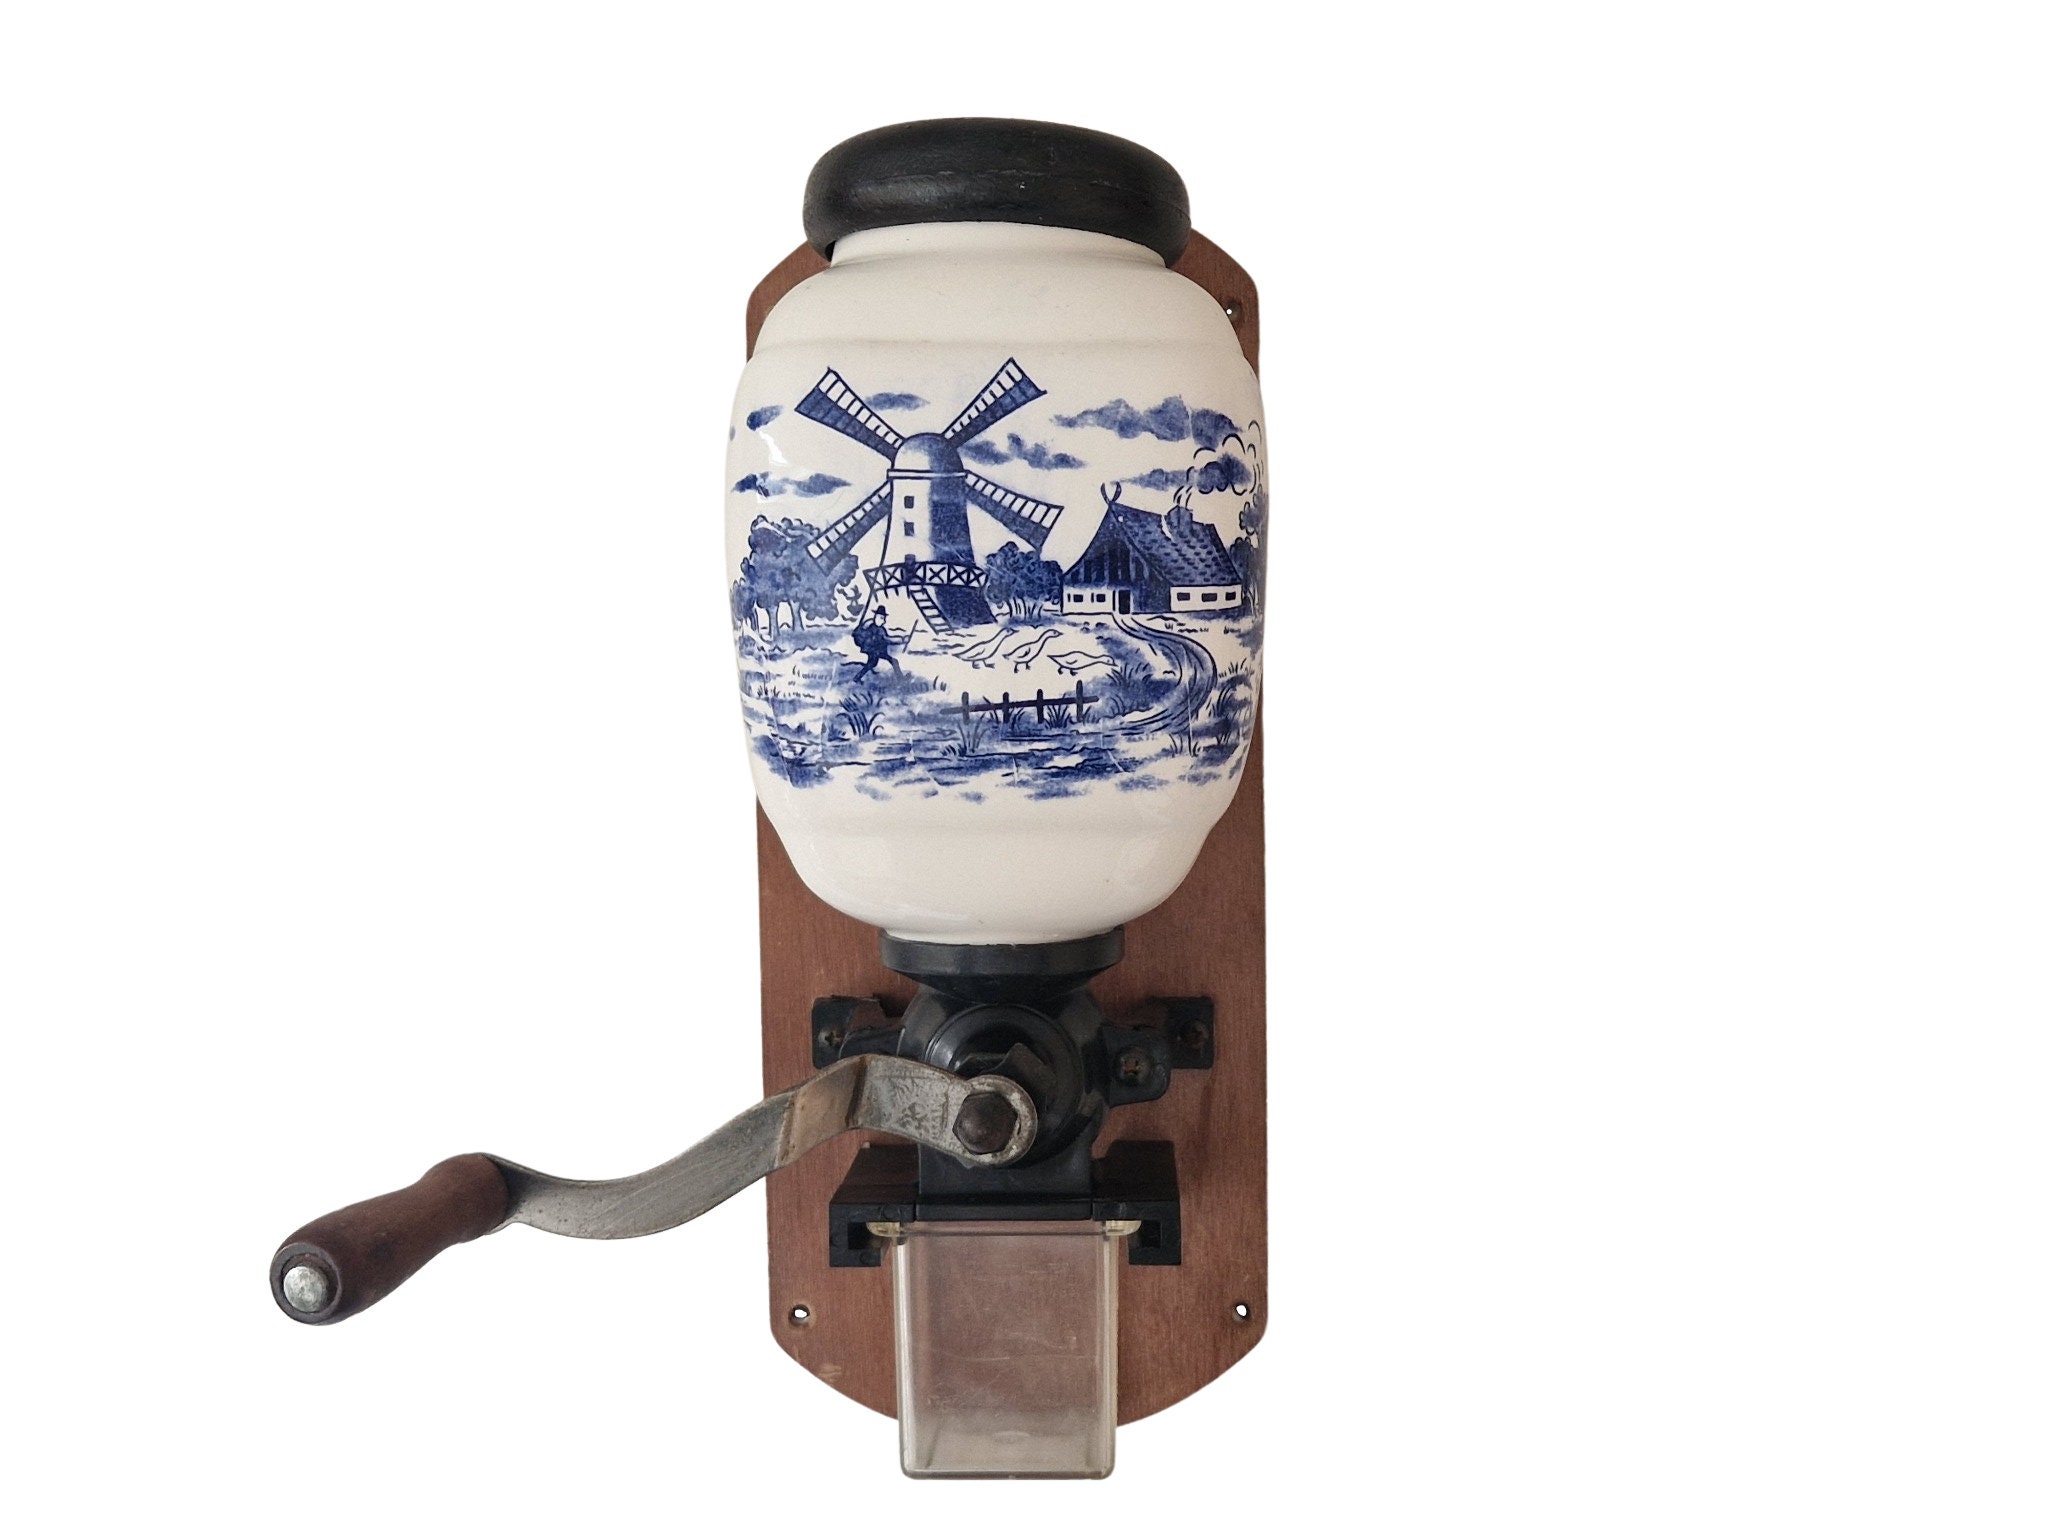 formule Okkernoot Armoedig Vintage Dutch Coffee Mill With Blue Delft Ceramic Canister - Etsy